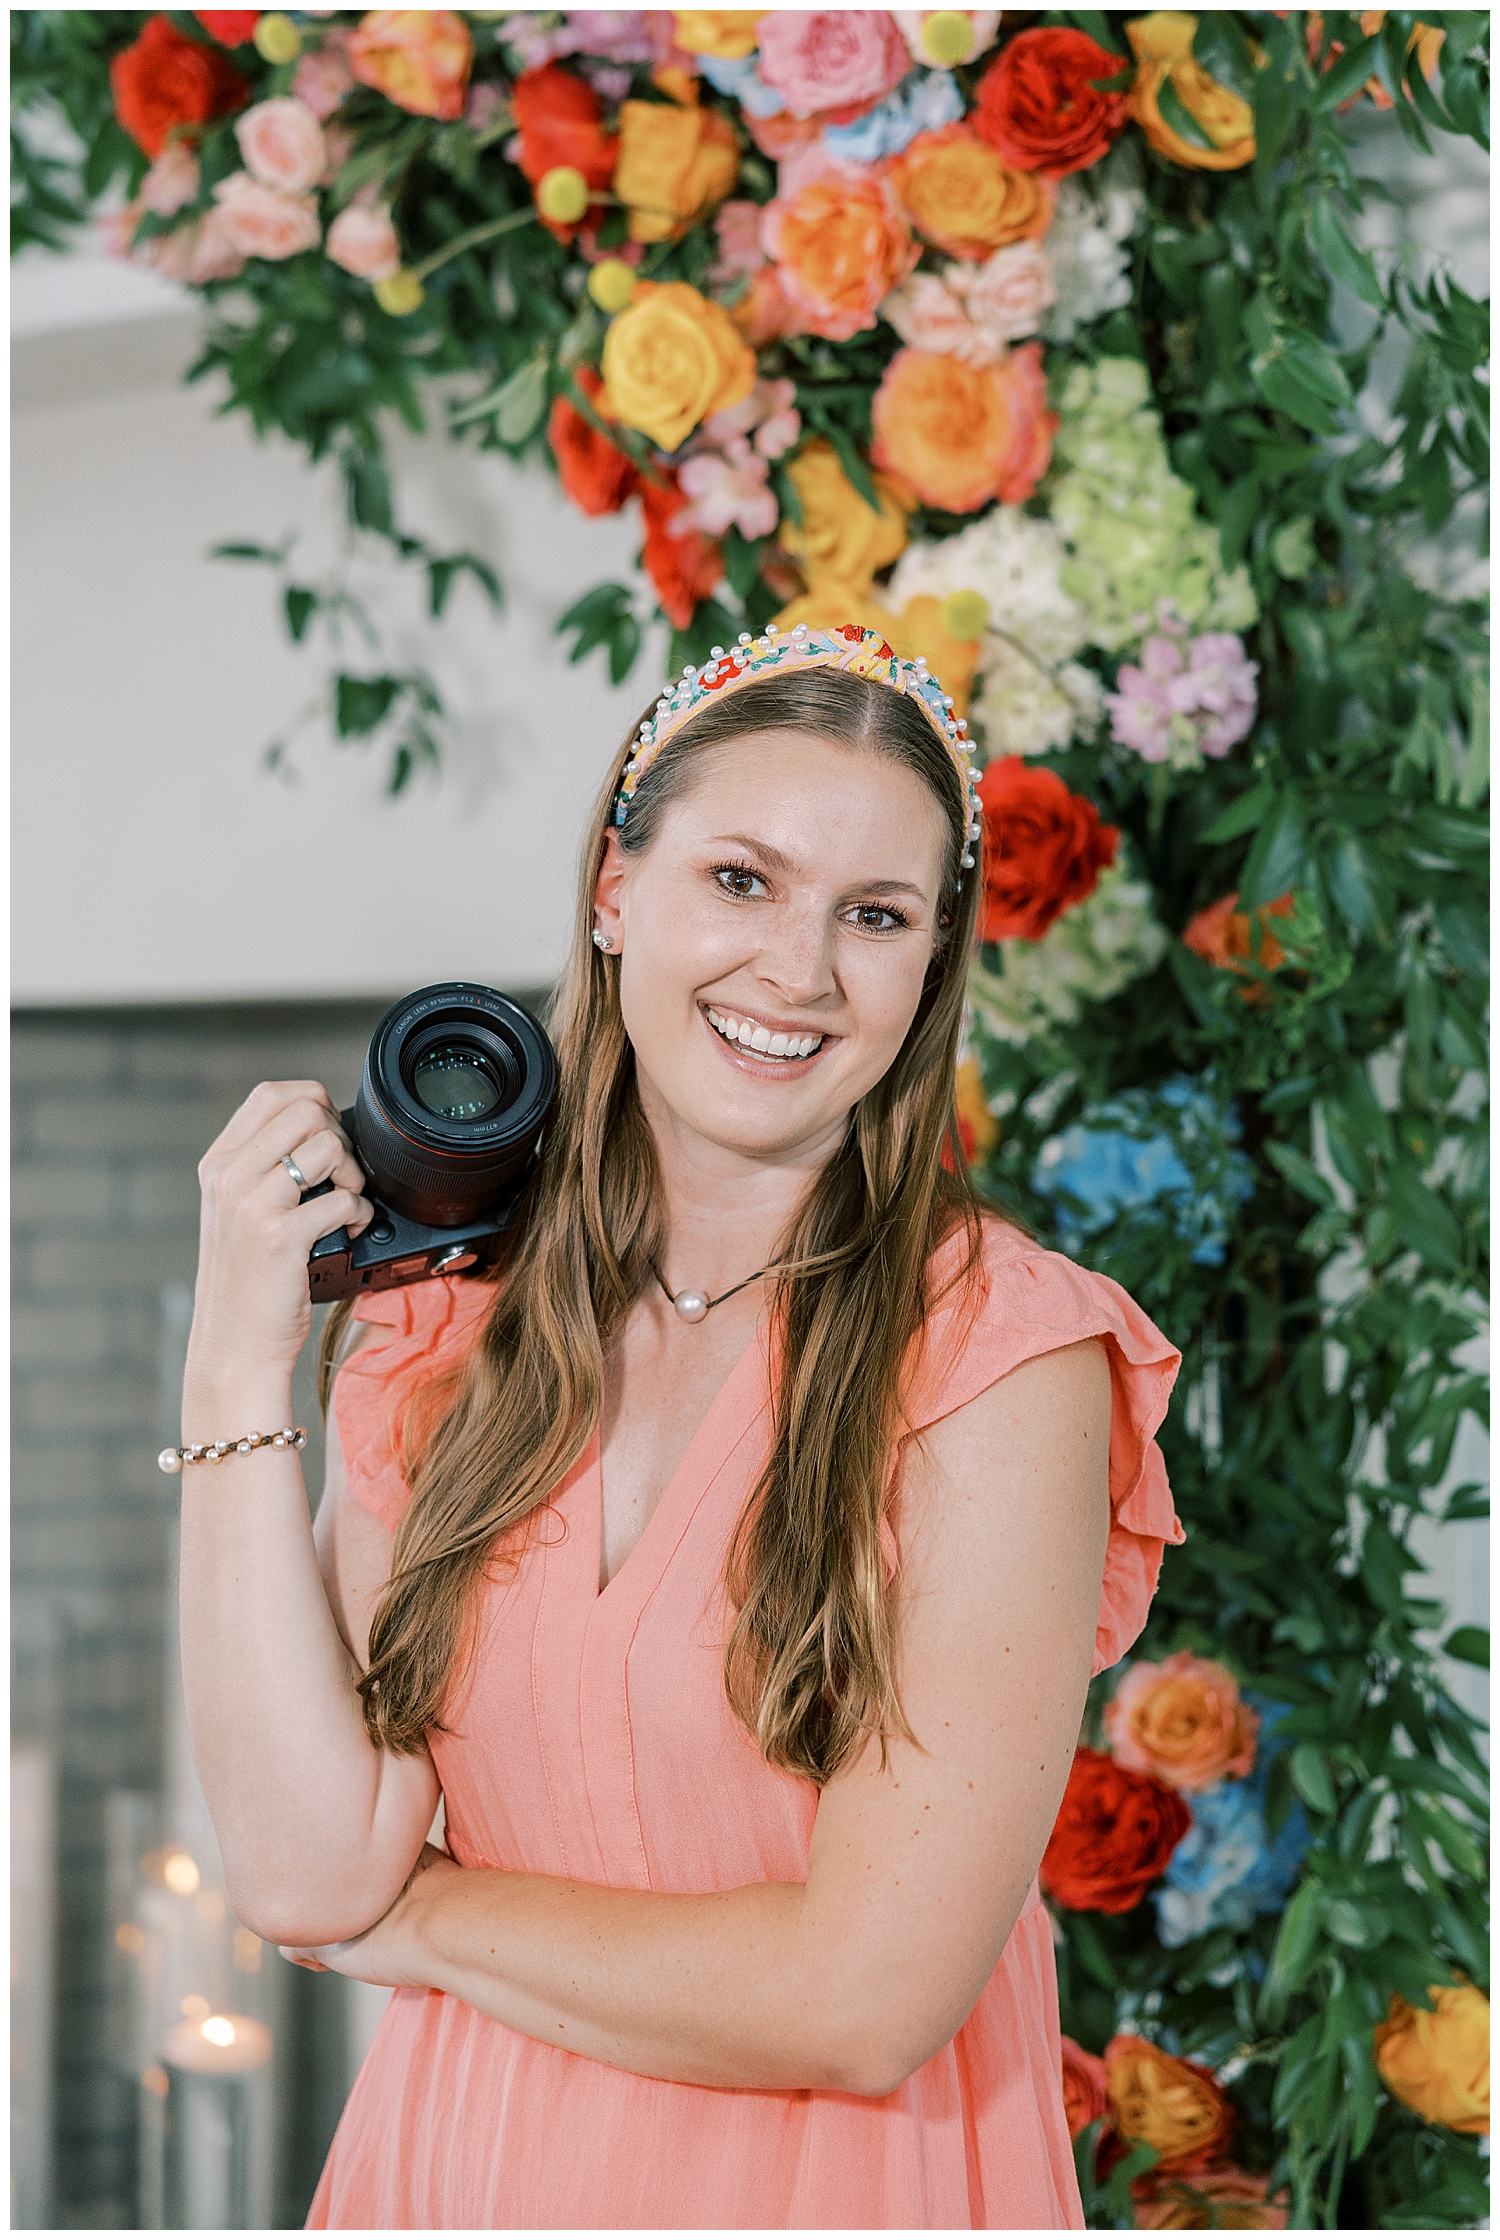 Juliann Riggs smiles for a headshot in front of a floral arch.